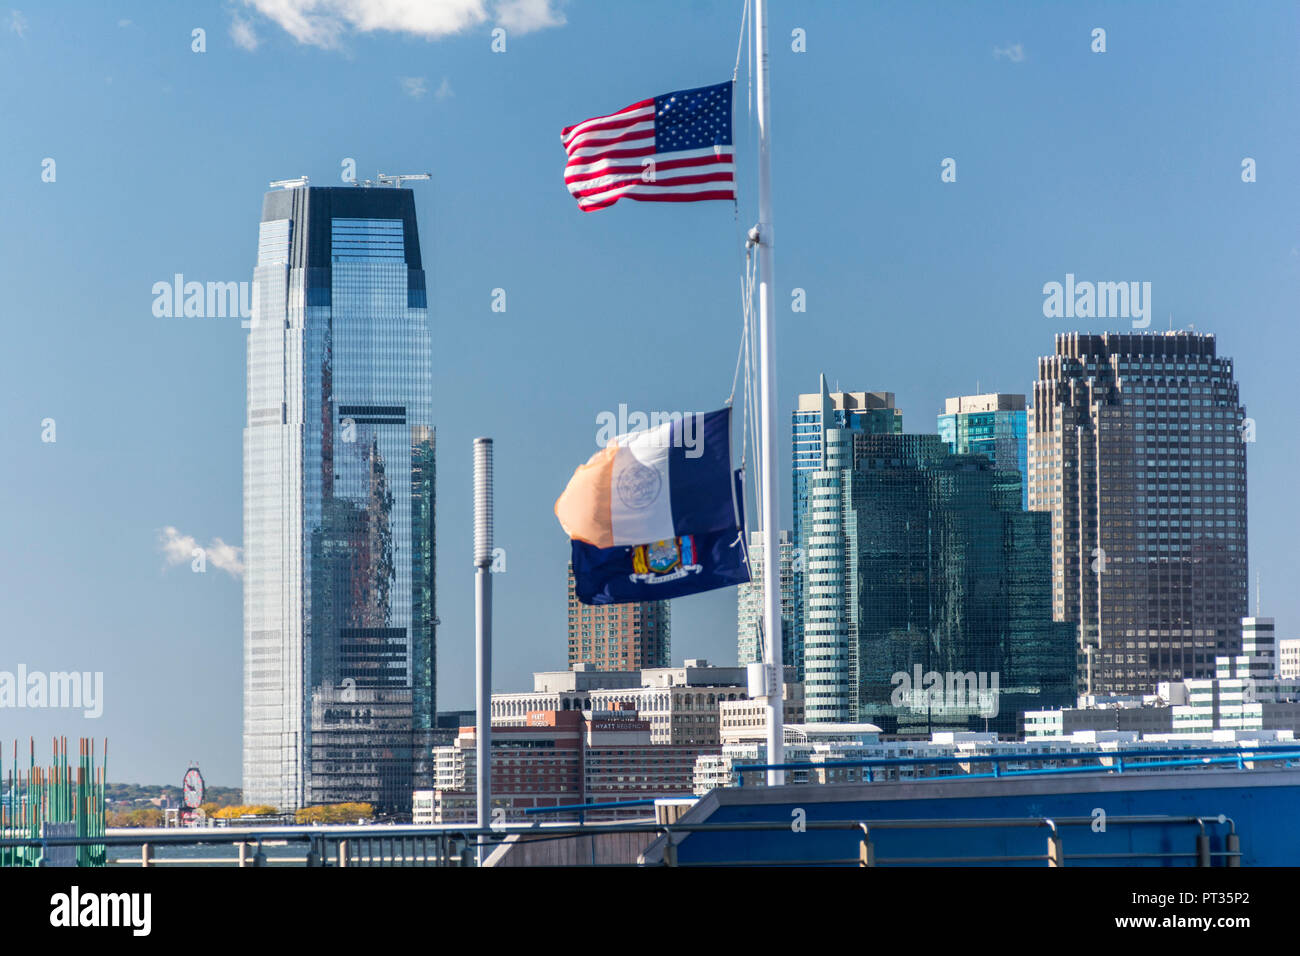 New Jersey City skyline on the Hudson River in the USA Stock Photo